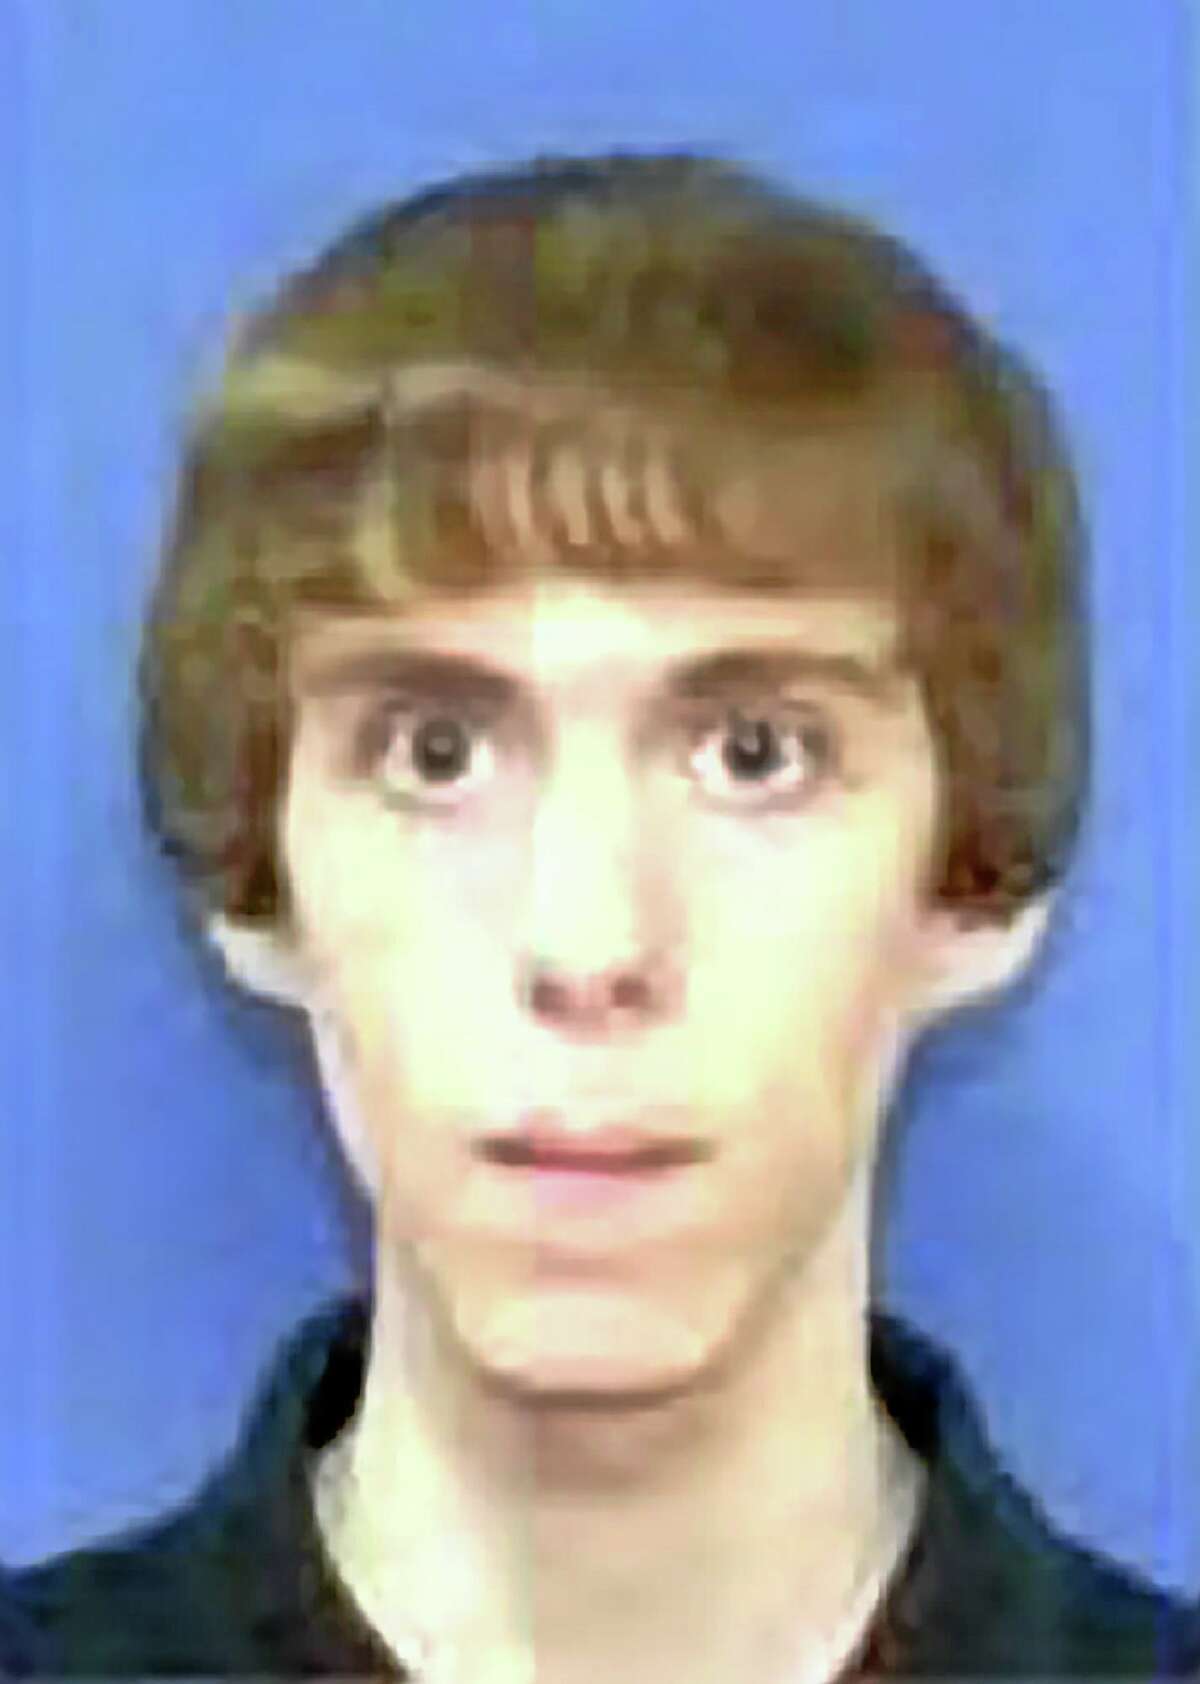 This undated file photo circulated by law enforcement and provided by NBC News, shows Adam Lanza. Authorities say Lanza killed his mother at their home and then opened fire inside the Sandy Hook Elementary School in Newtown, killing 26 people.